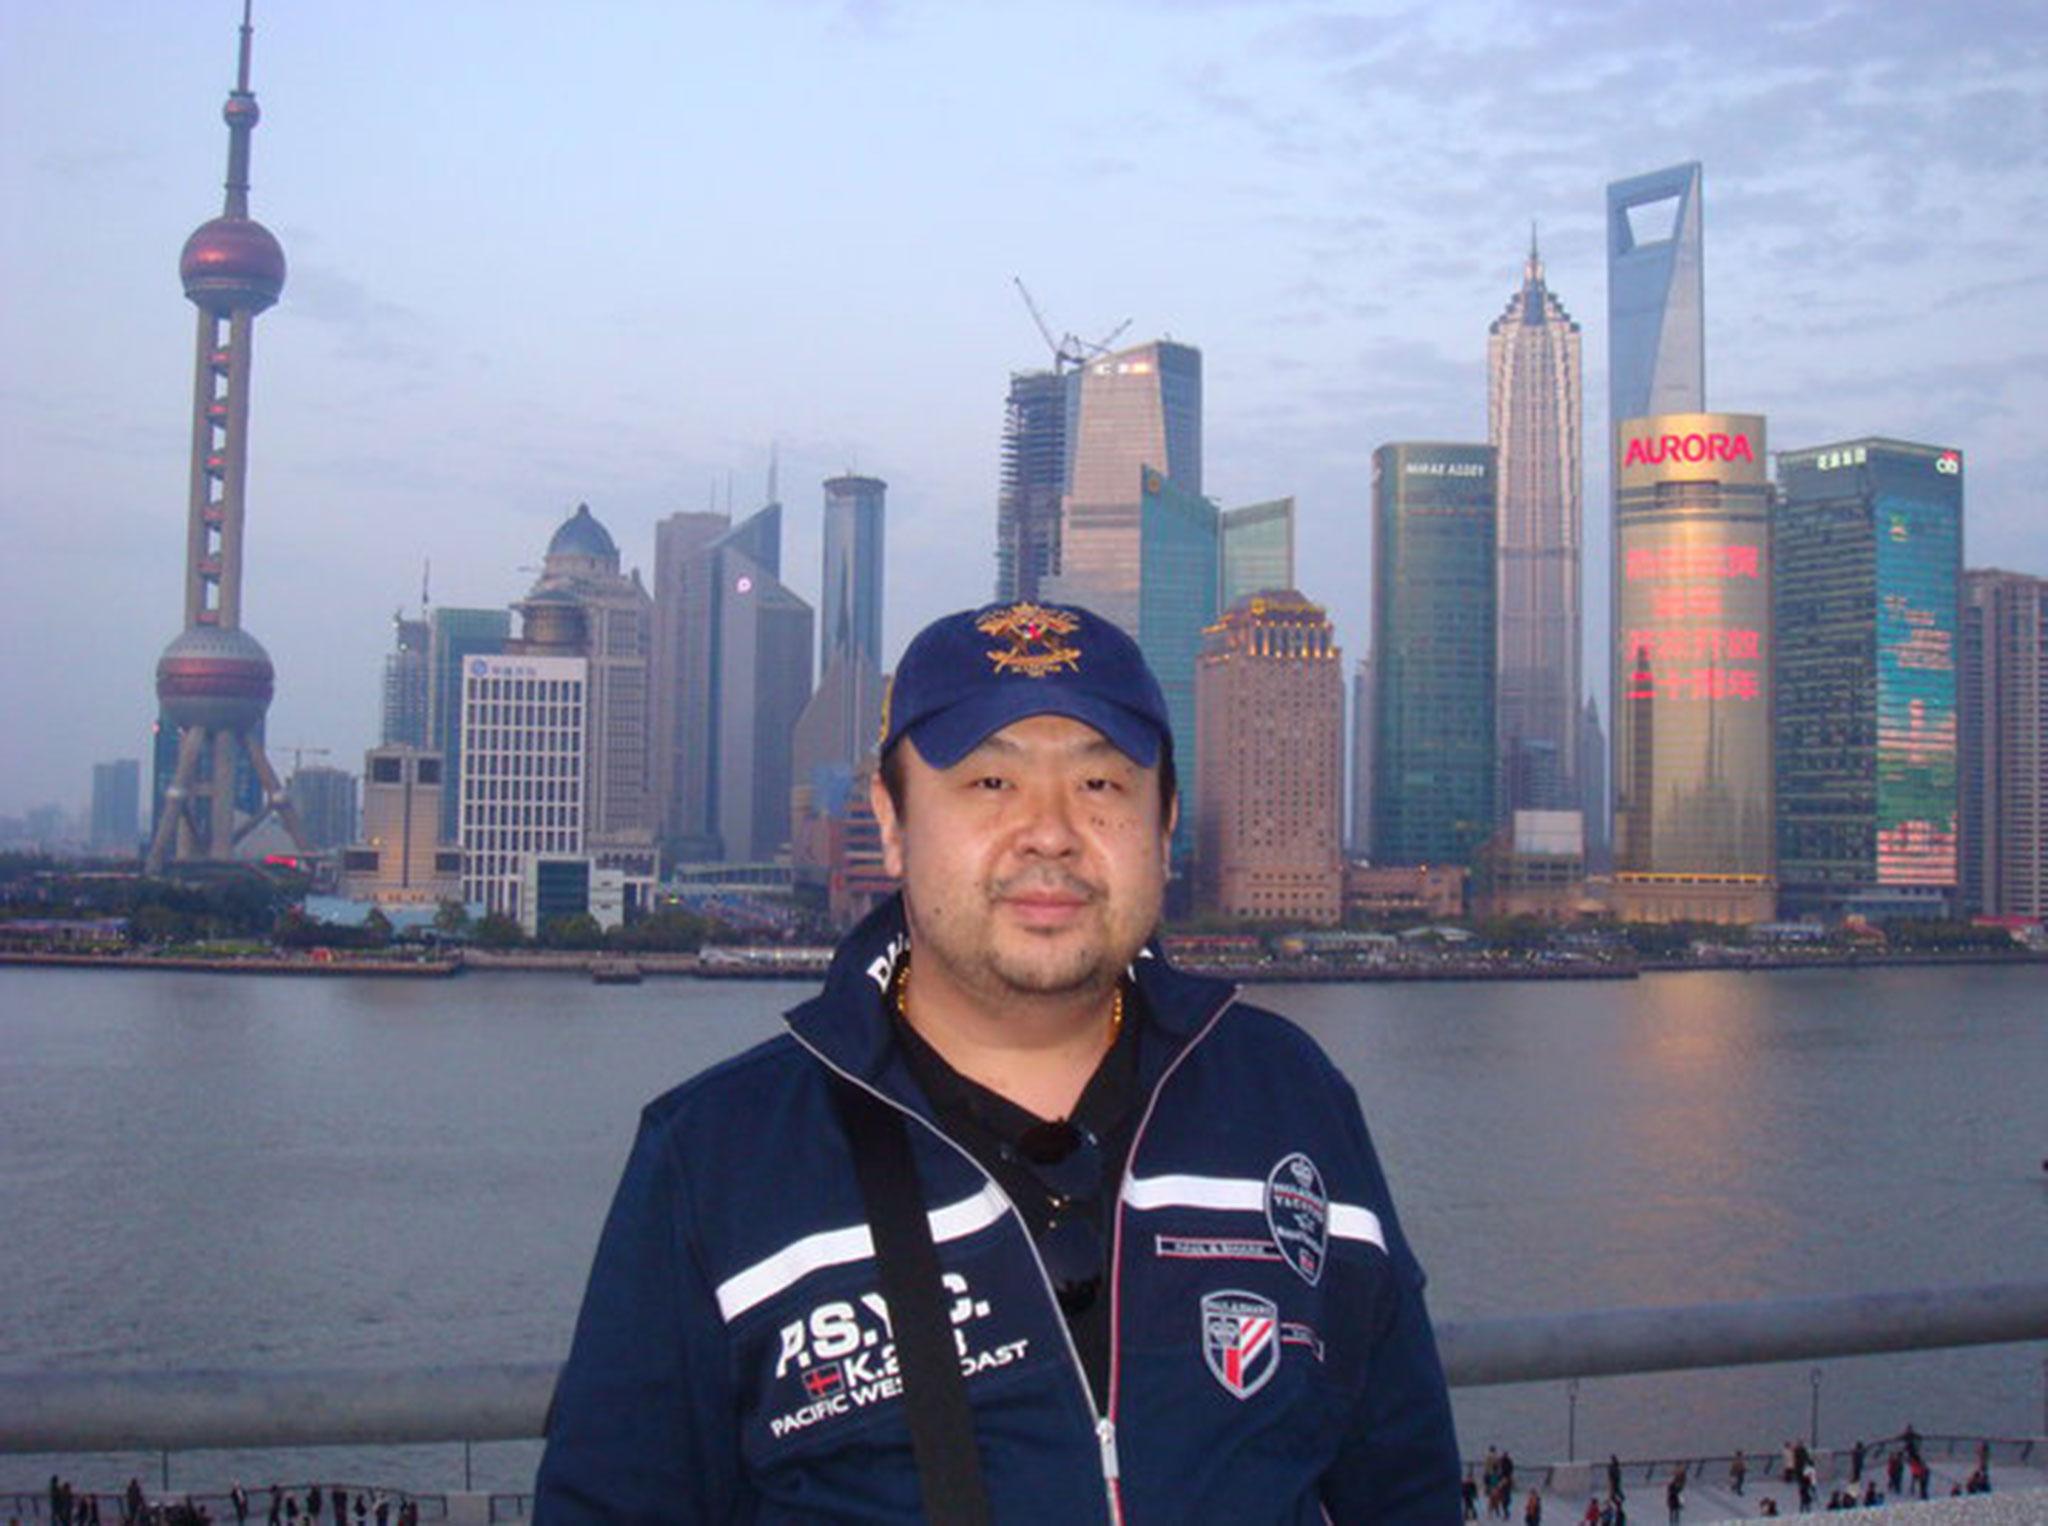 &#13;
A photo believed to show Kim Jong-nam in Shanghai, posted in Facebook in 2010&#13;